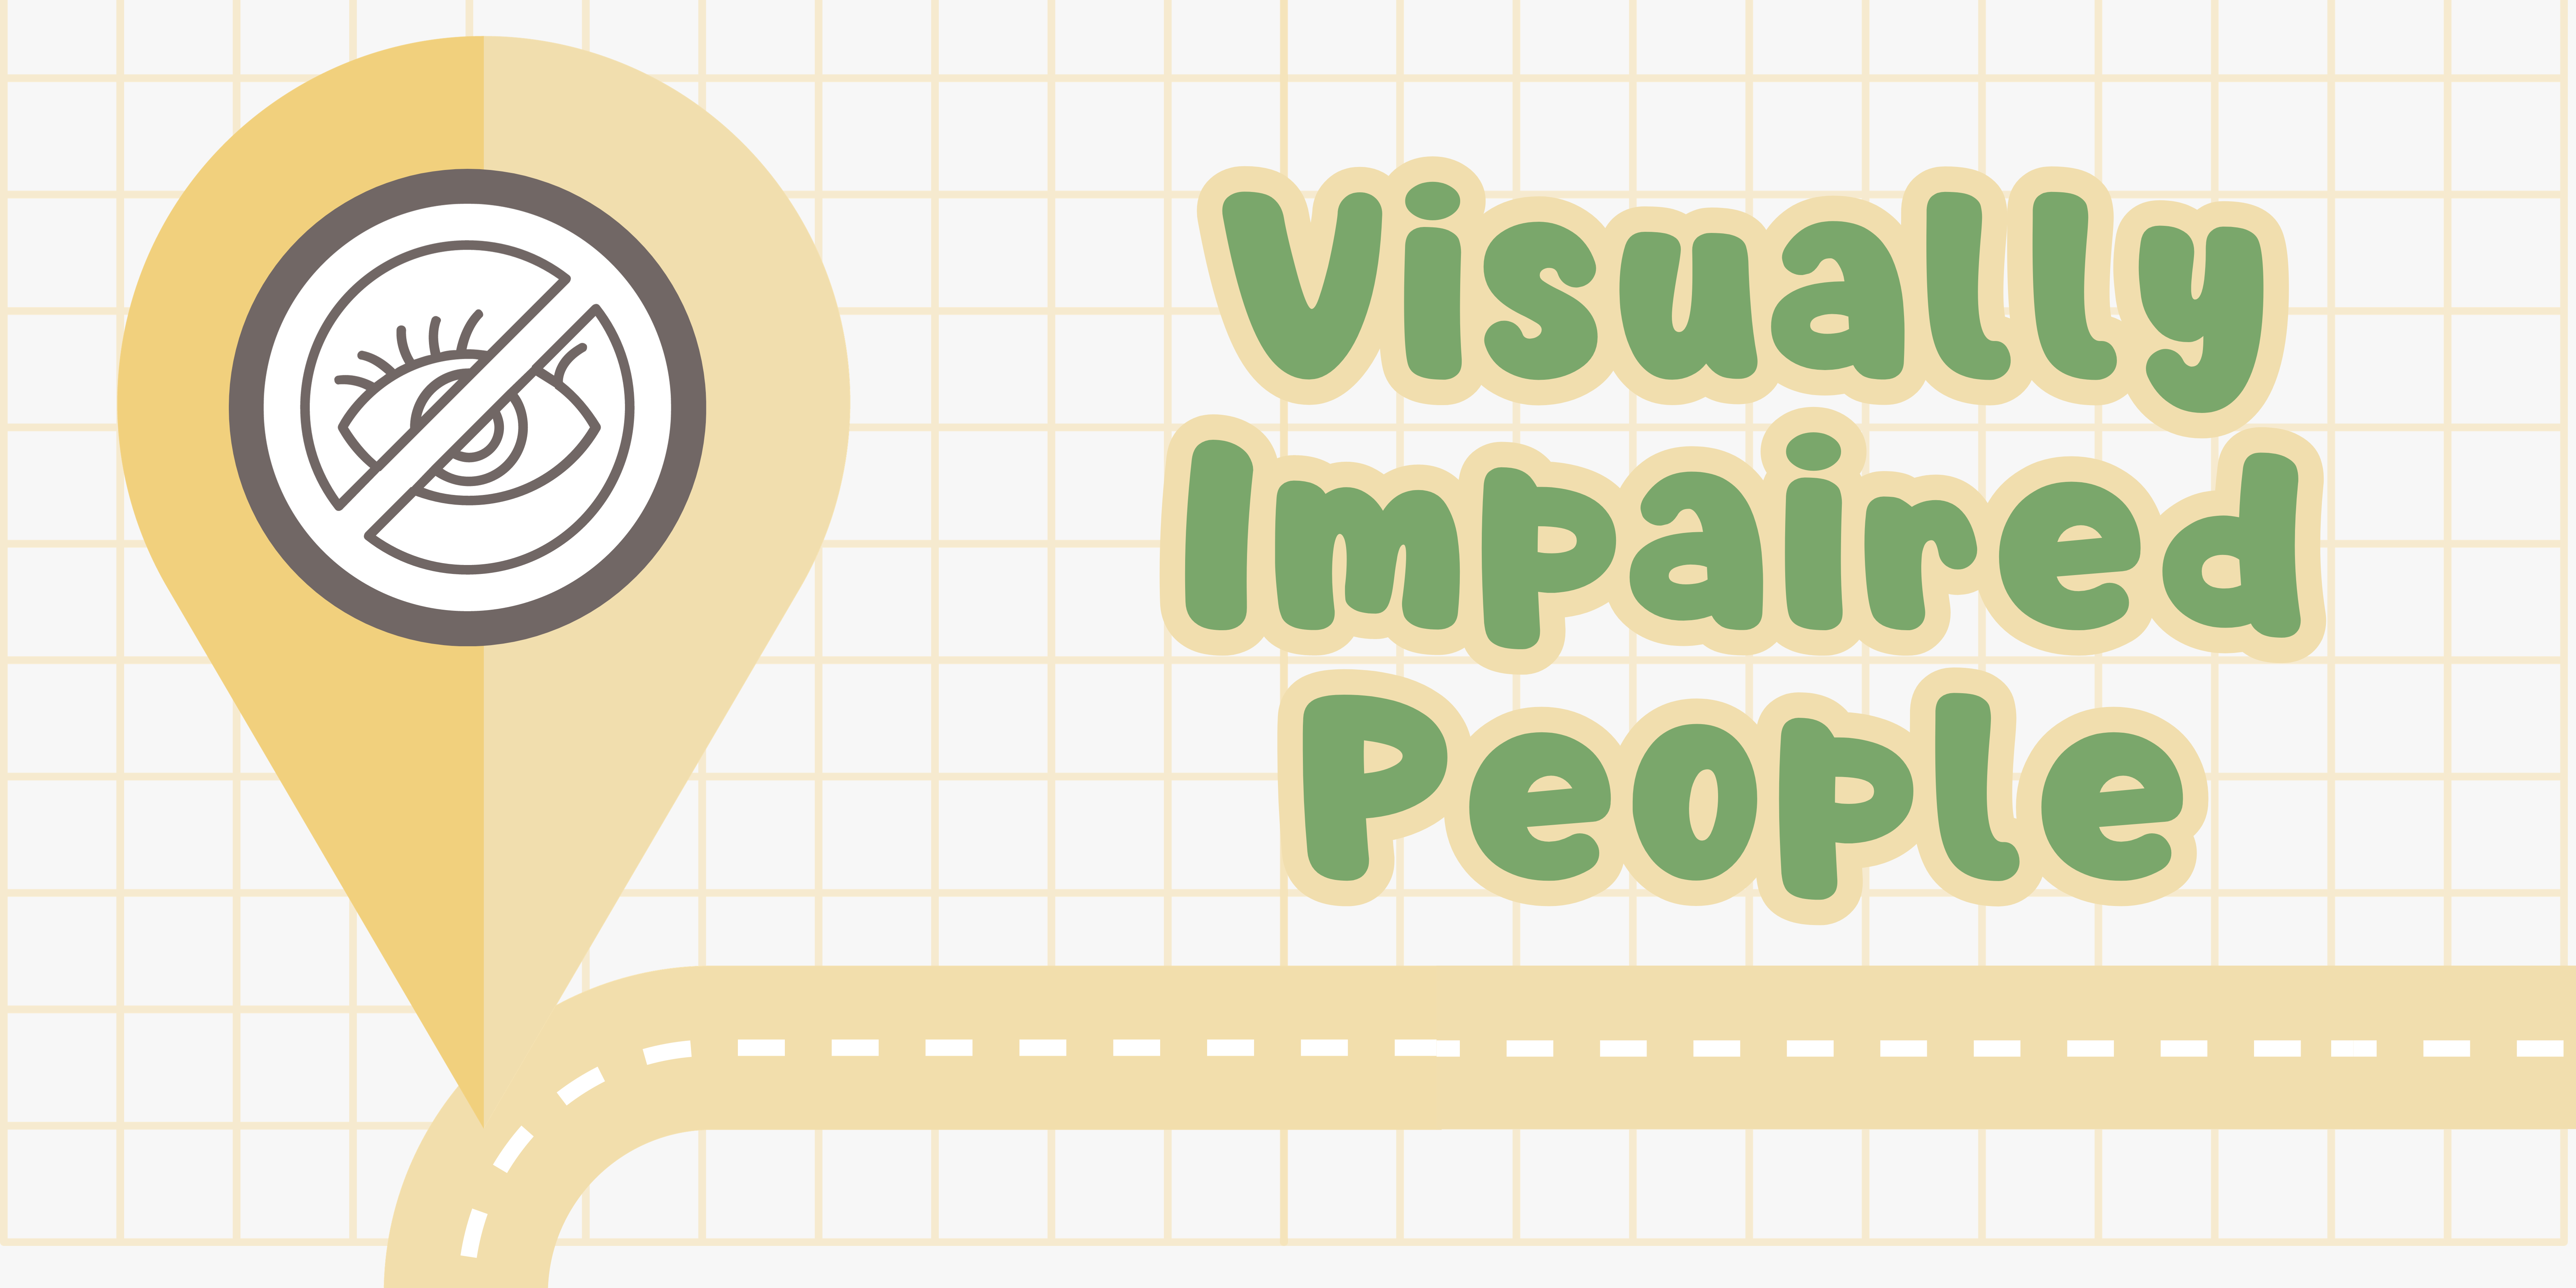 Visually Impaired people